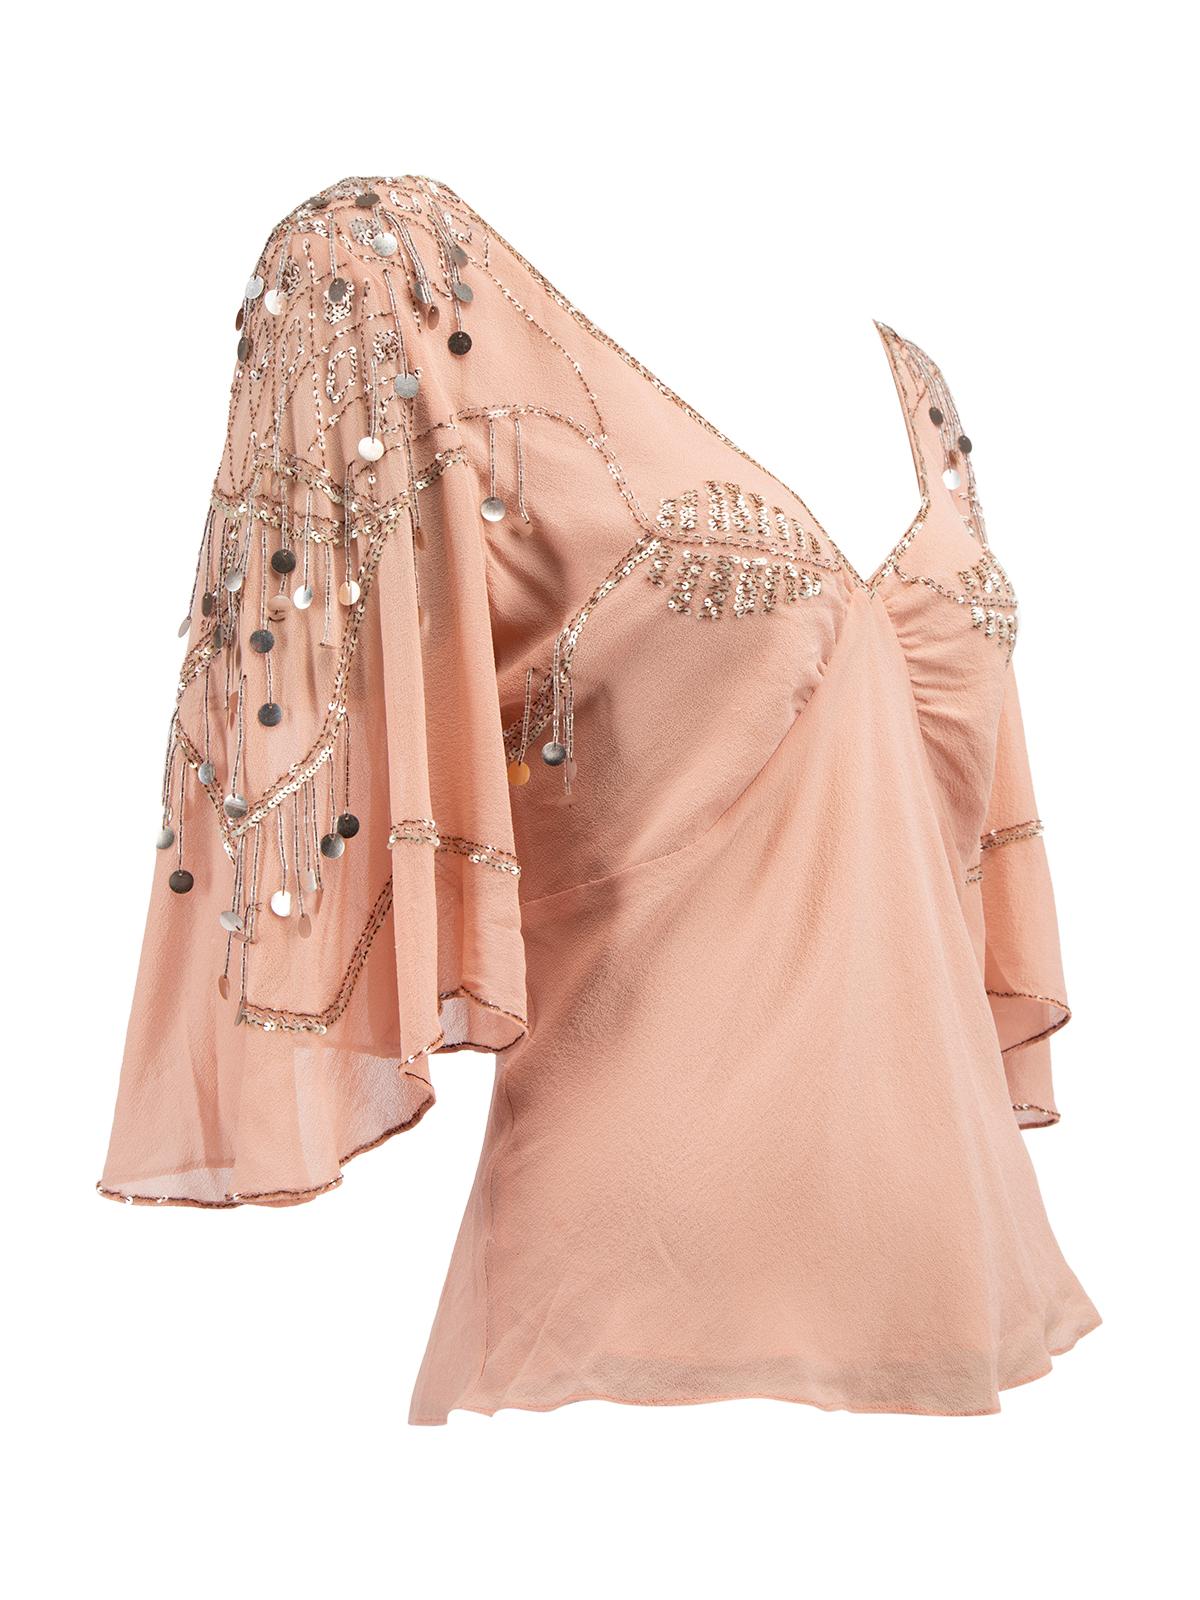 CONDITION is Very good. No visible wear to top is evident on this used Temperley London designer resale item. Details Pink Silk Blouse V neckline Short flutter sleeves Embellished with silver tone sequins and and beads Fully lined with silk Made in